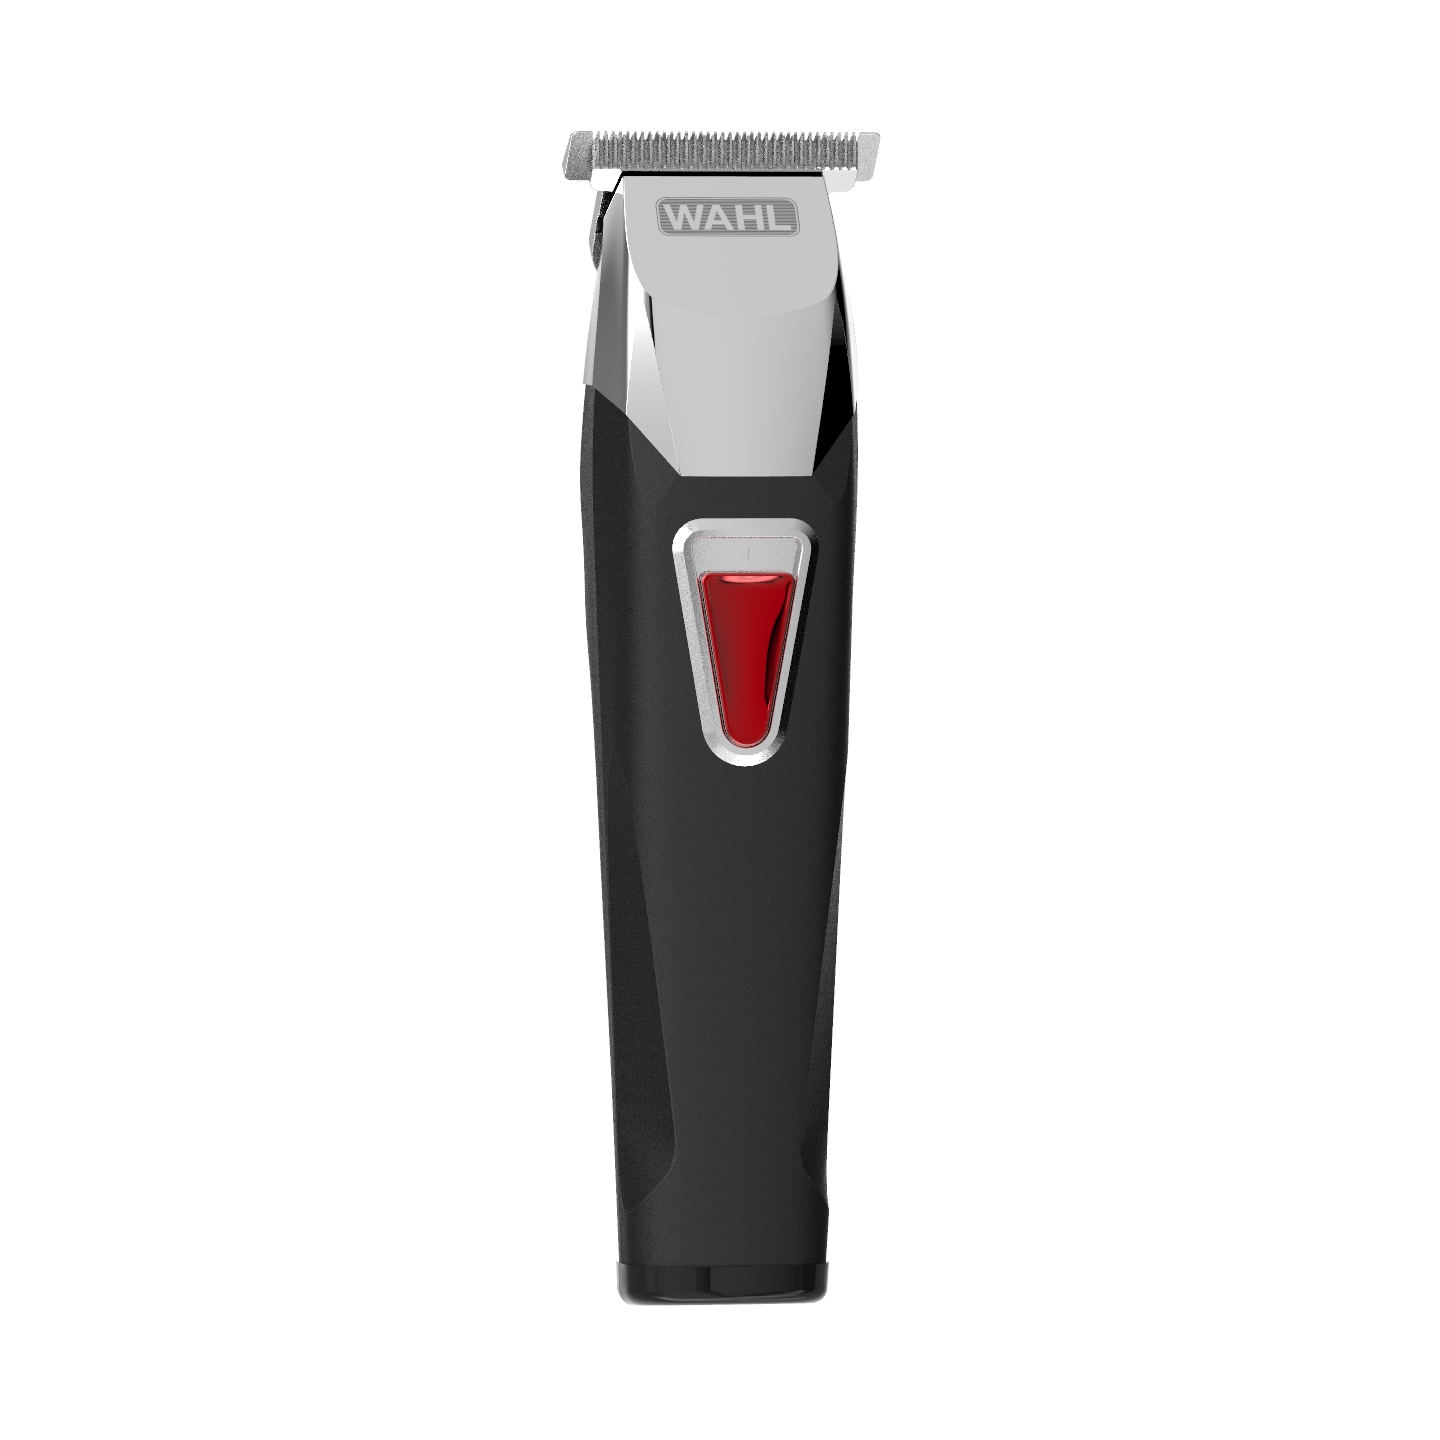 wahl t pro cordless review